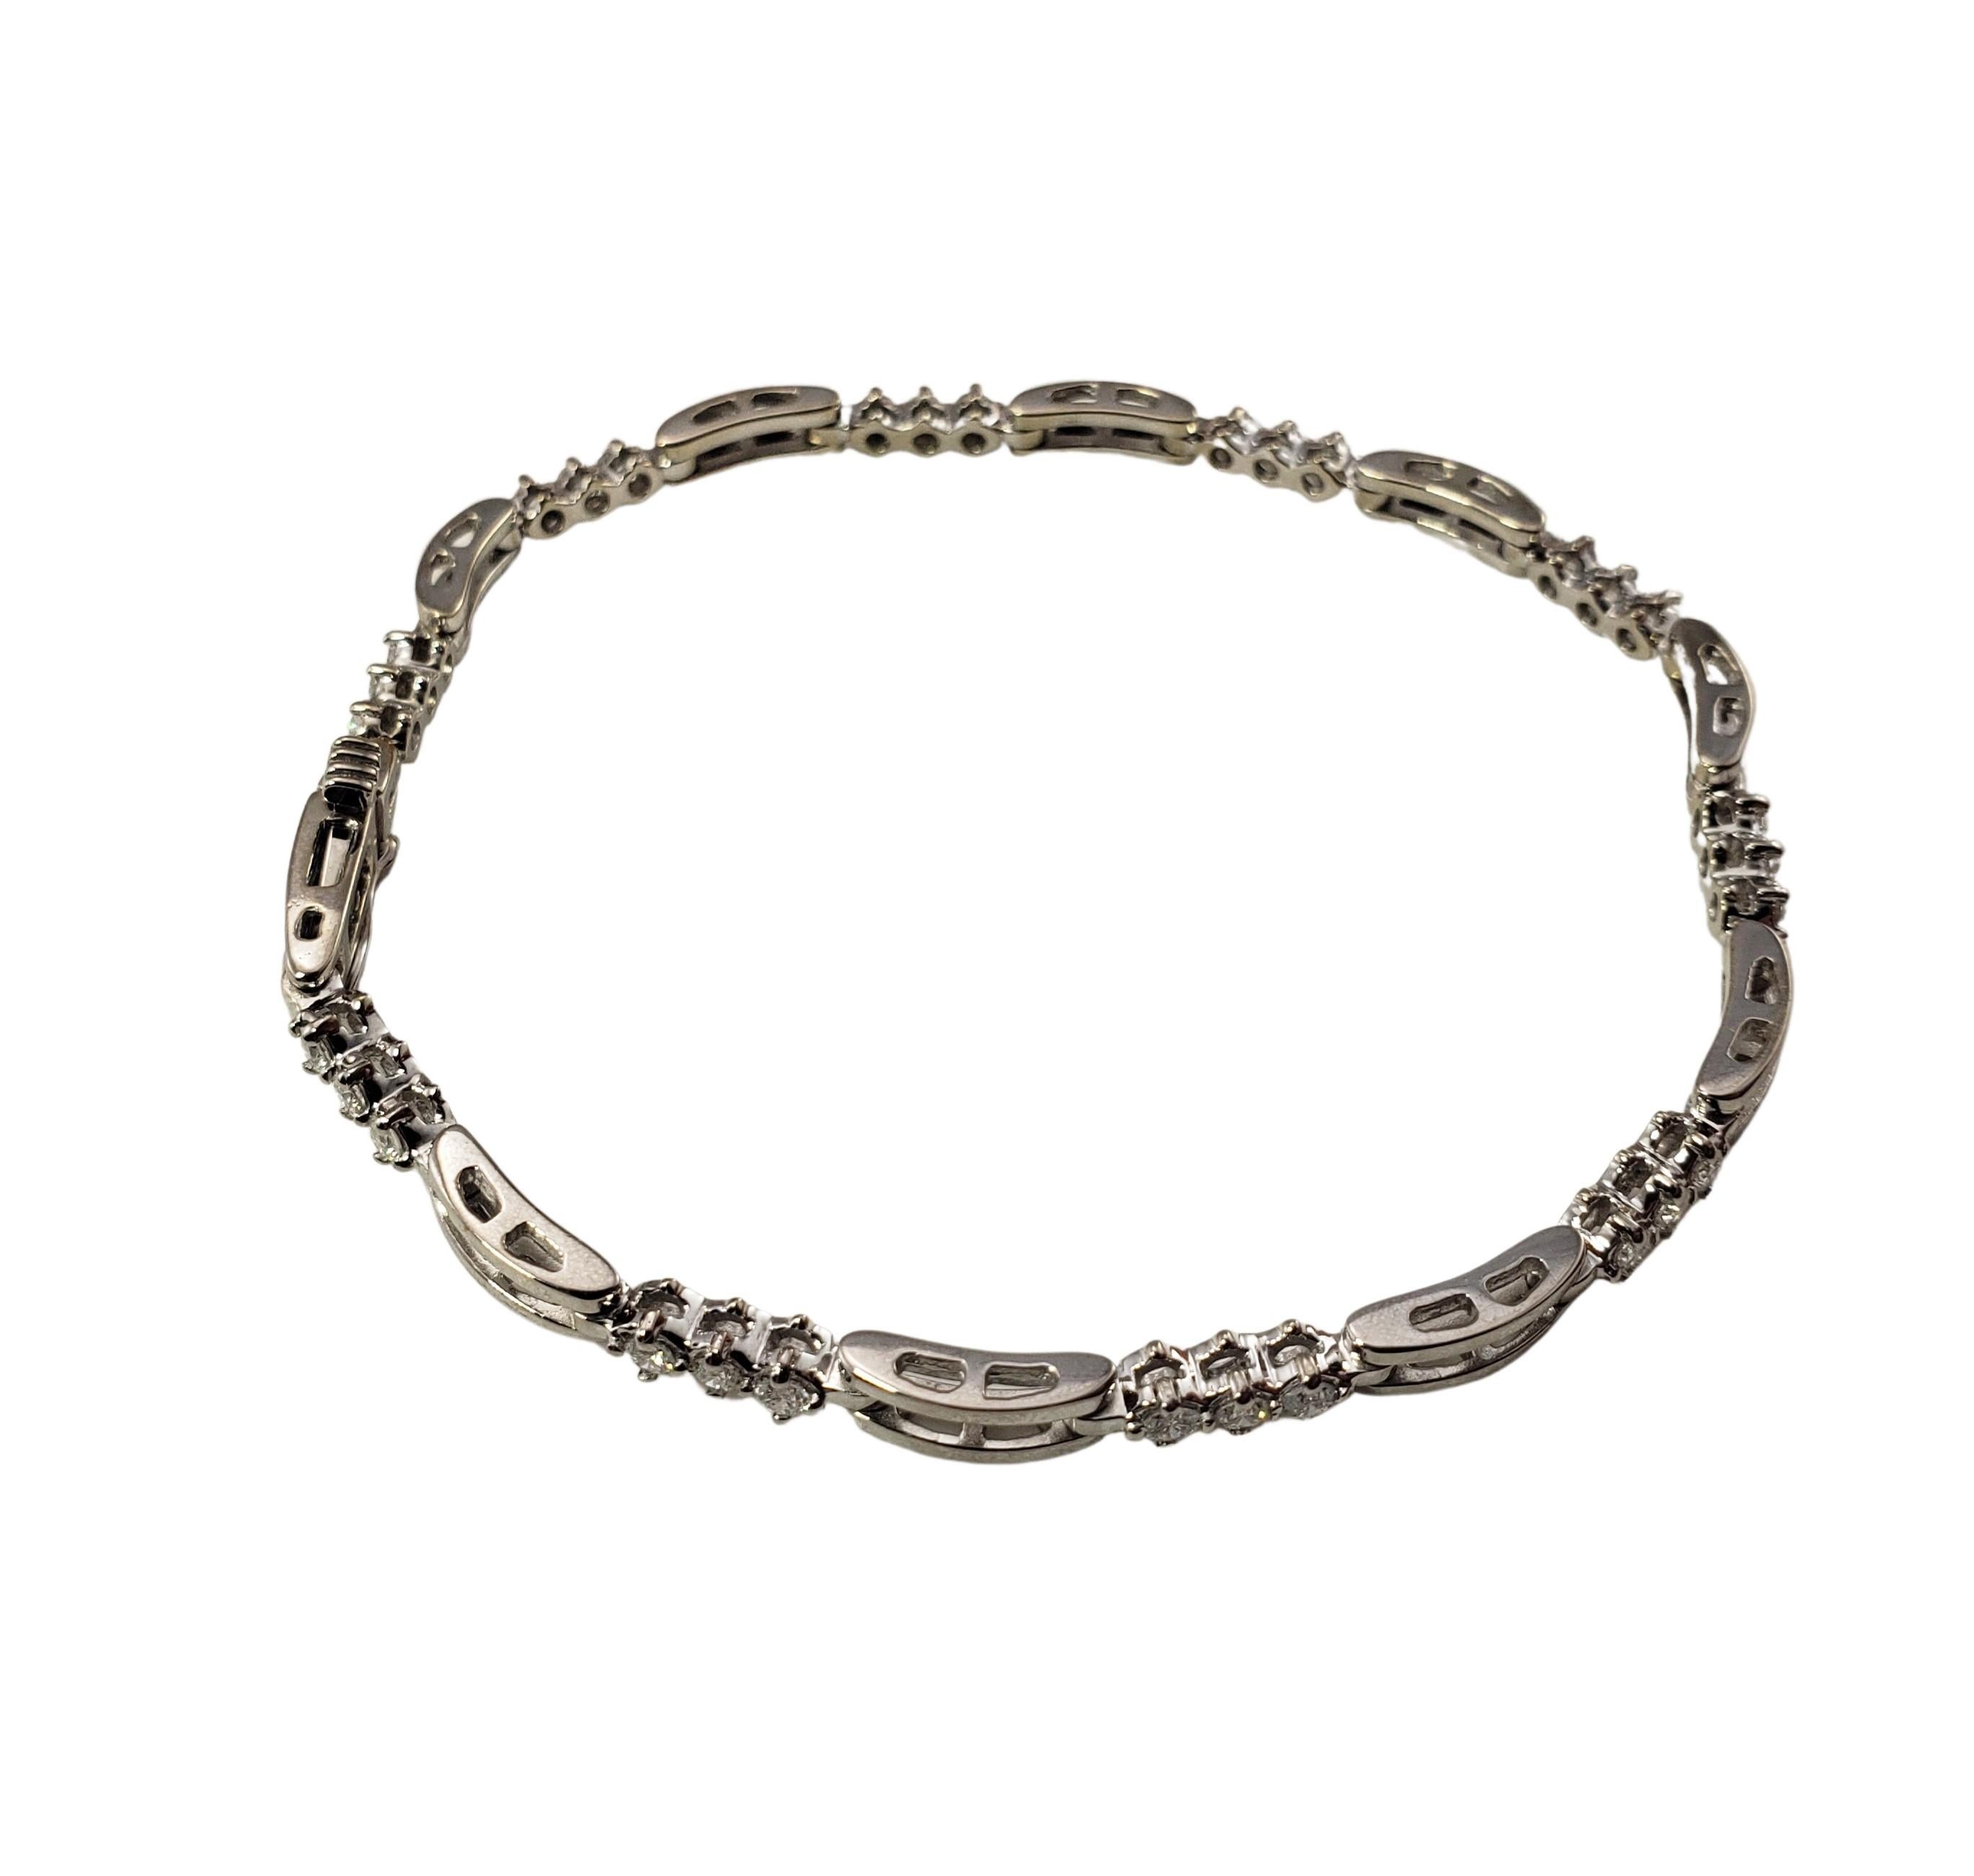 14 Karat White Gold and Diamond Bracelet-

This sparkling bracelet features 30 round brilliant cut diamonds set in beautifully detailed 14K white gold.  Width:  3 mm.

Approximate total diamond weight:  .90 ct.

Diamond color: H-I

Diamond clarity: 